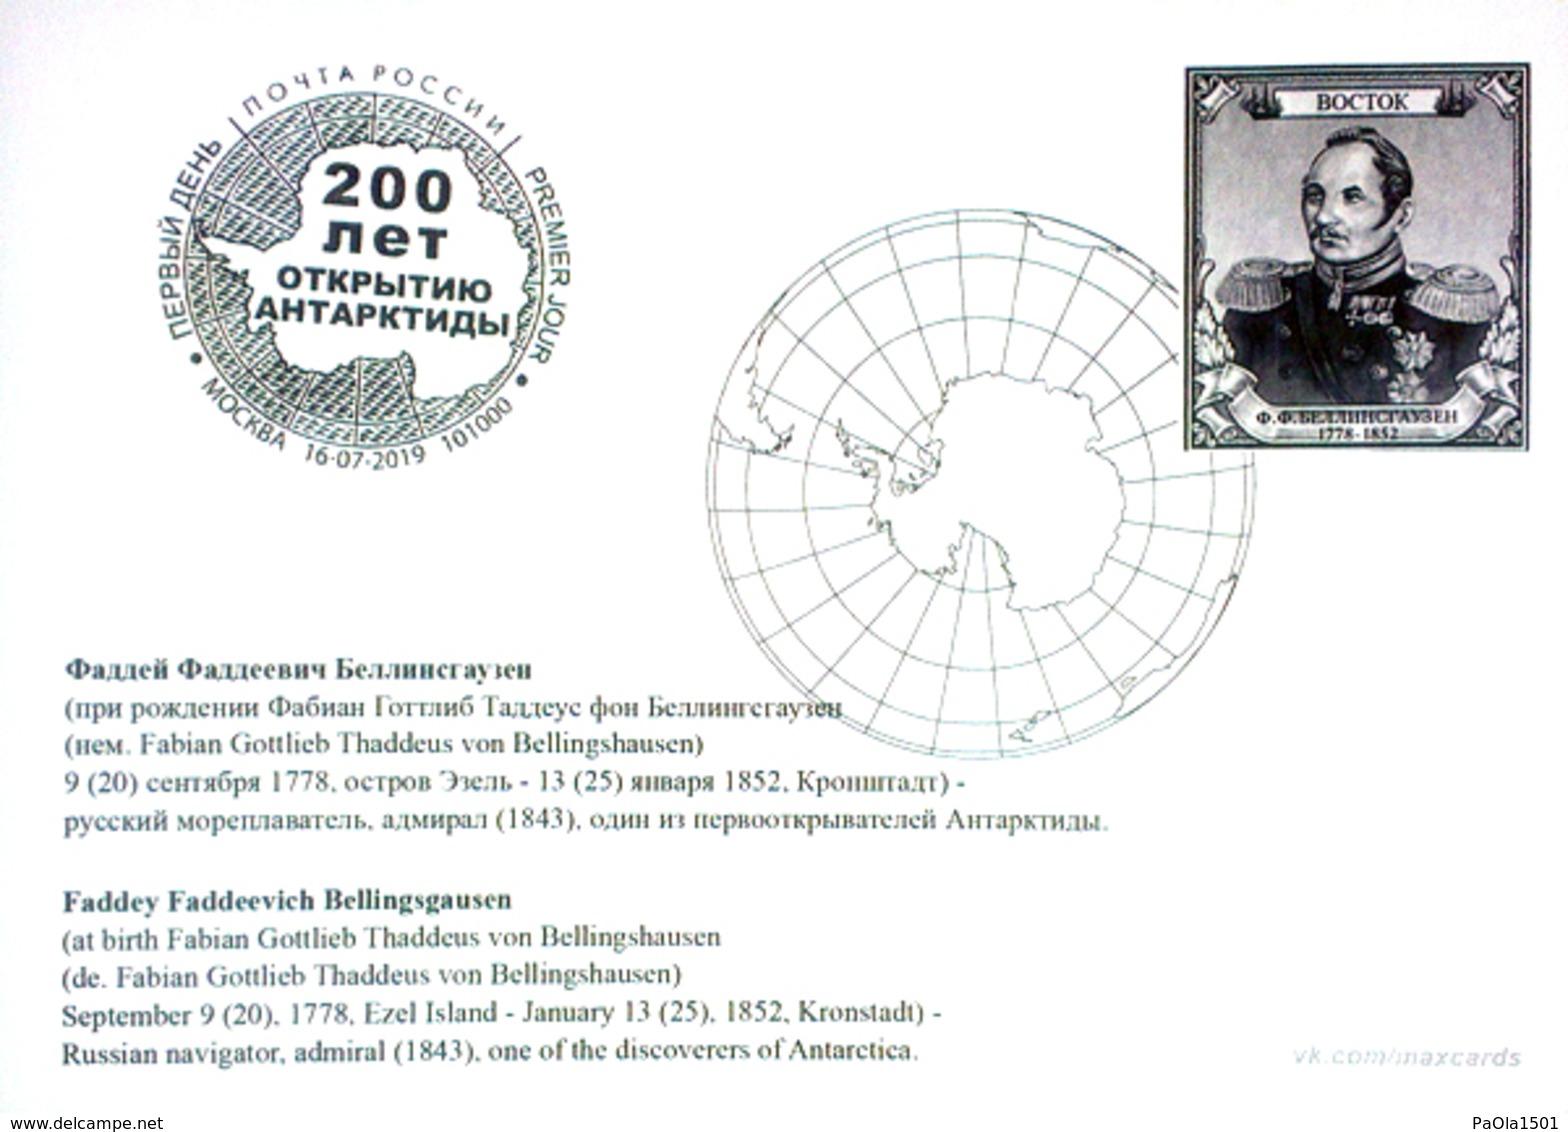 2496 - 2497 To The 200th Anniversary Of The Discovery Of Antarctica Sloops Vostok And Mirniy Maximum Cards Moscow 2019 - Cartes Maximum